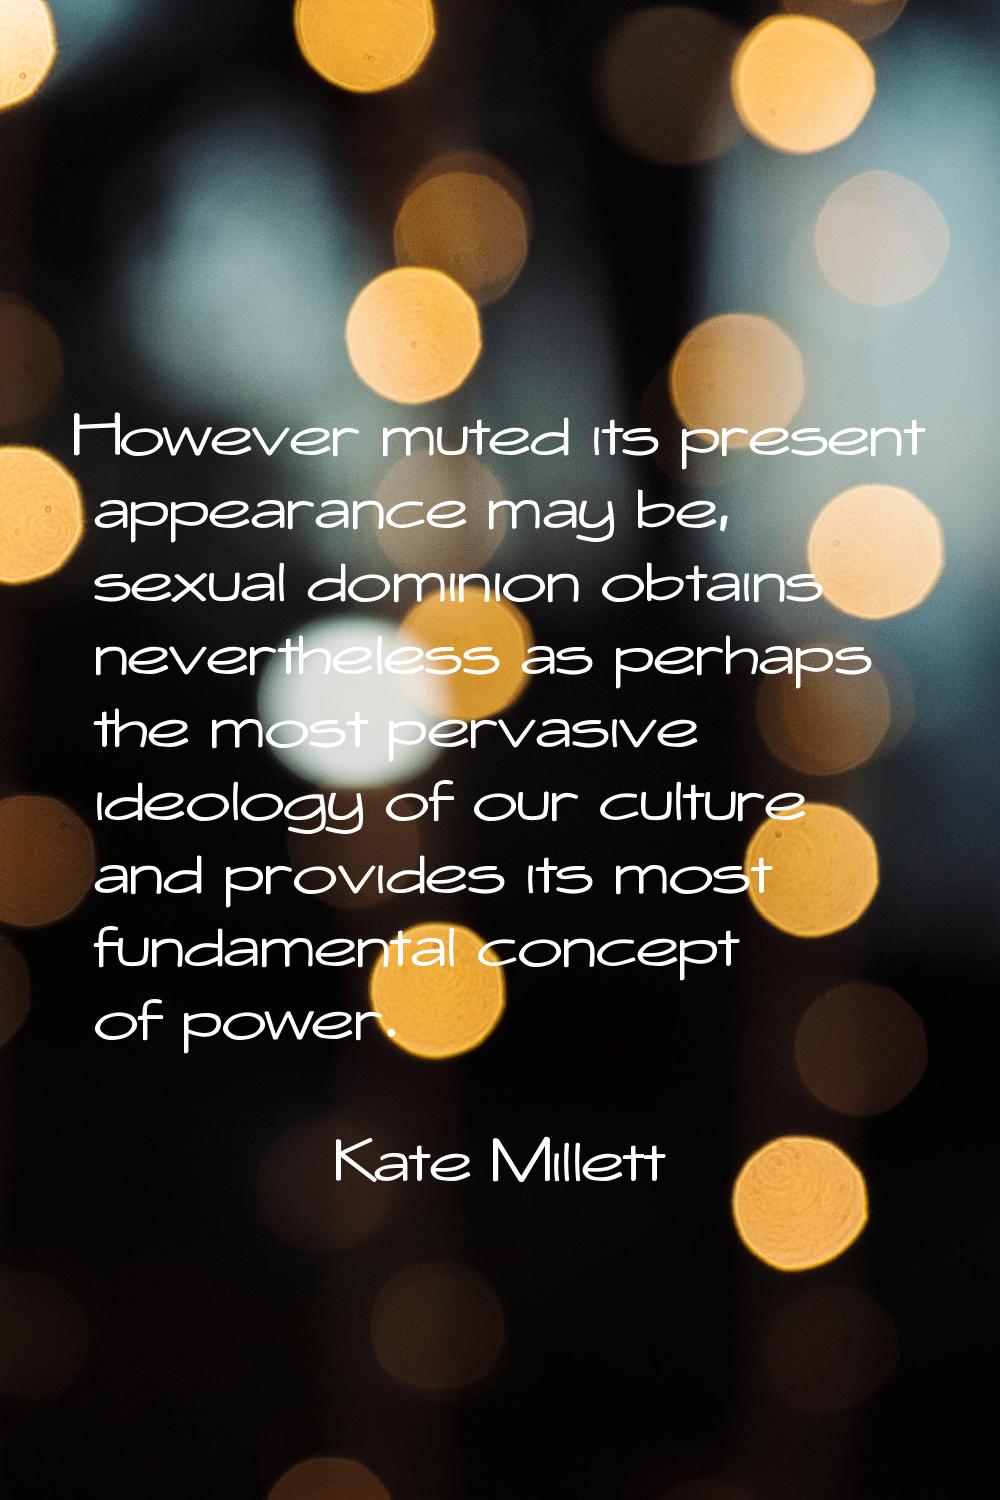 However muted its present appearance may be, sexual dominion obtains nevertheless as perhaps the mo